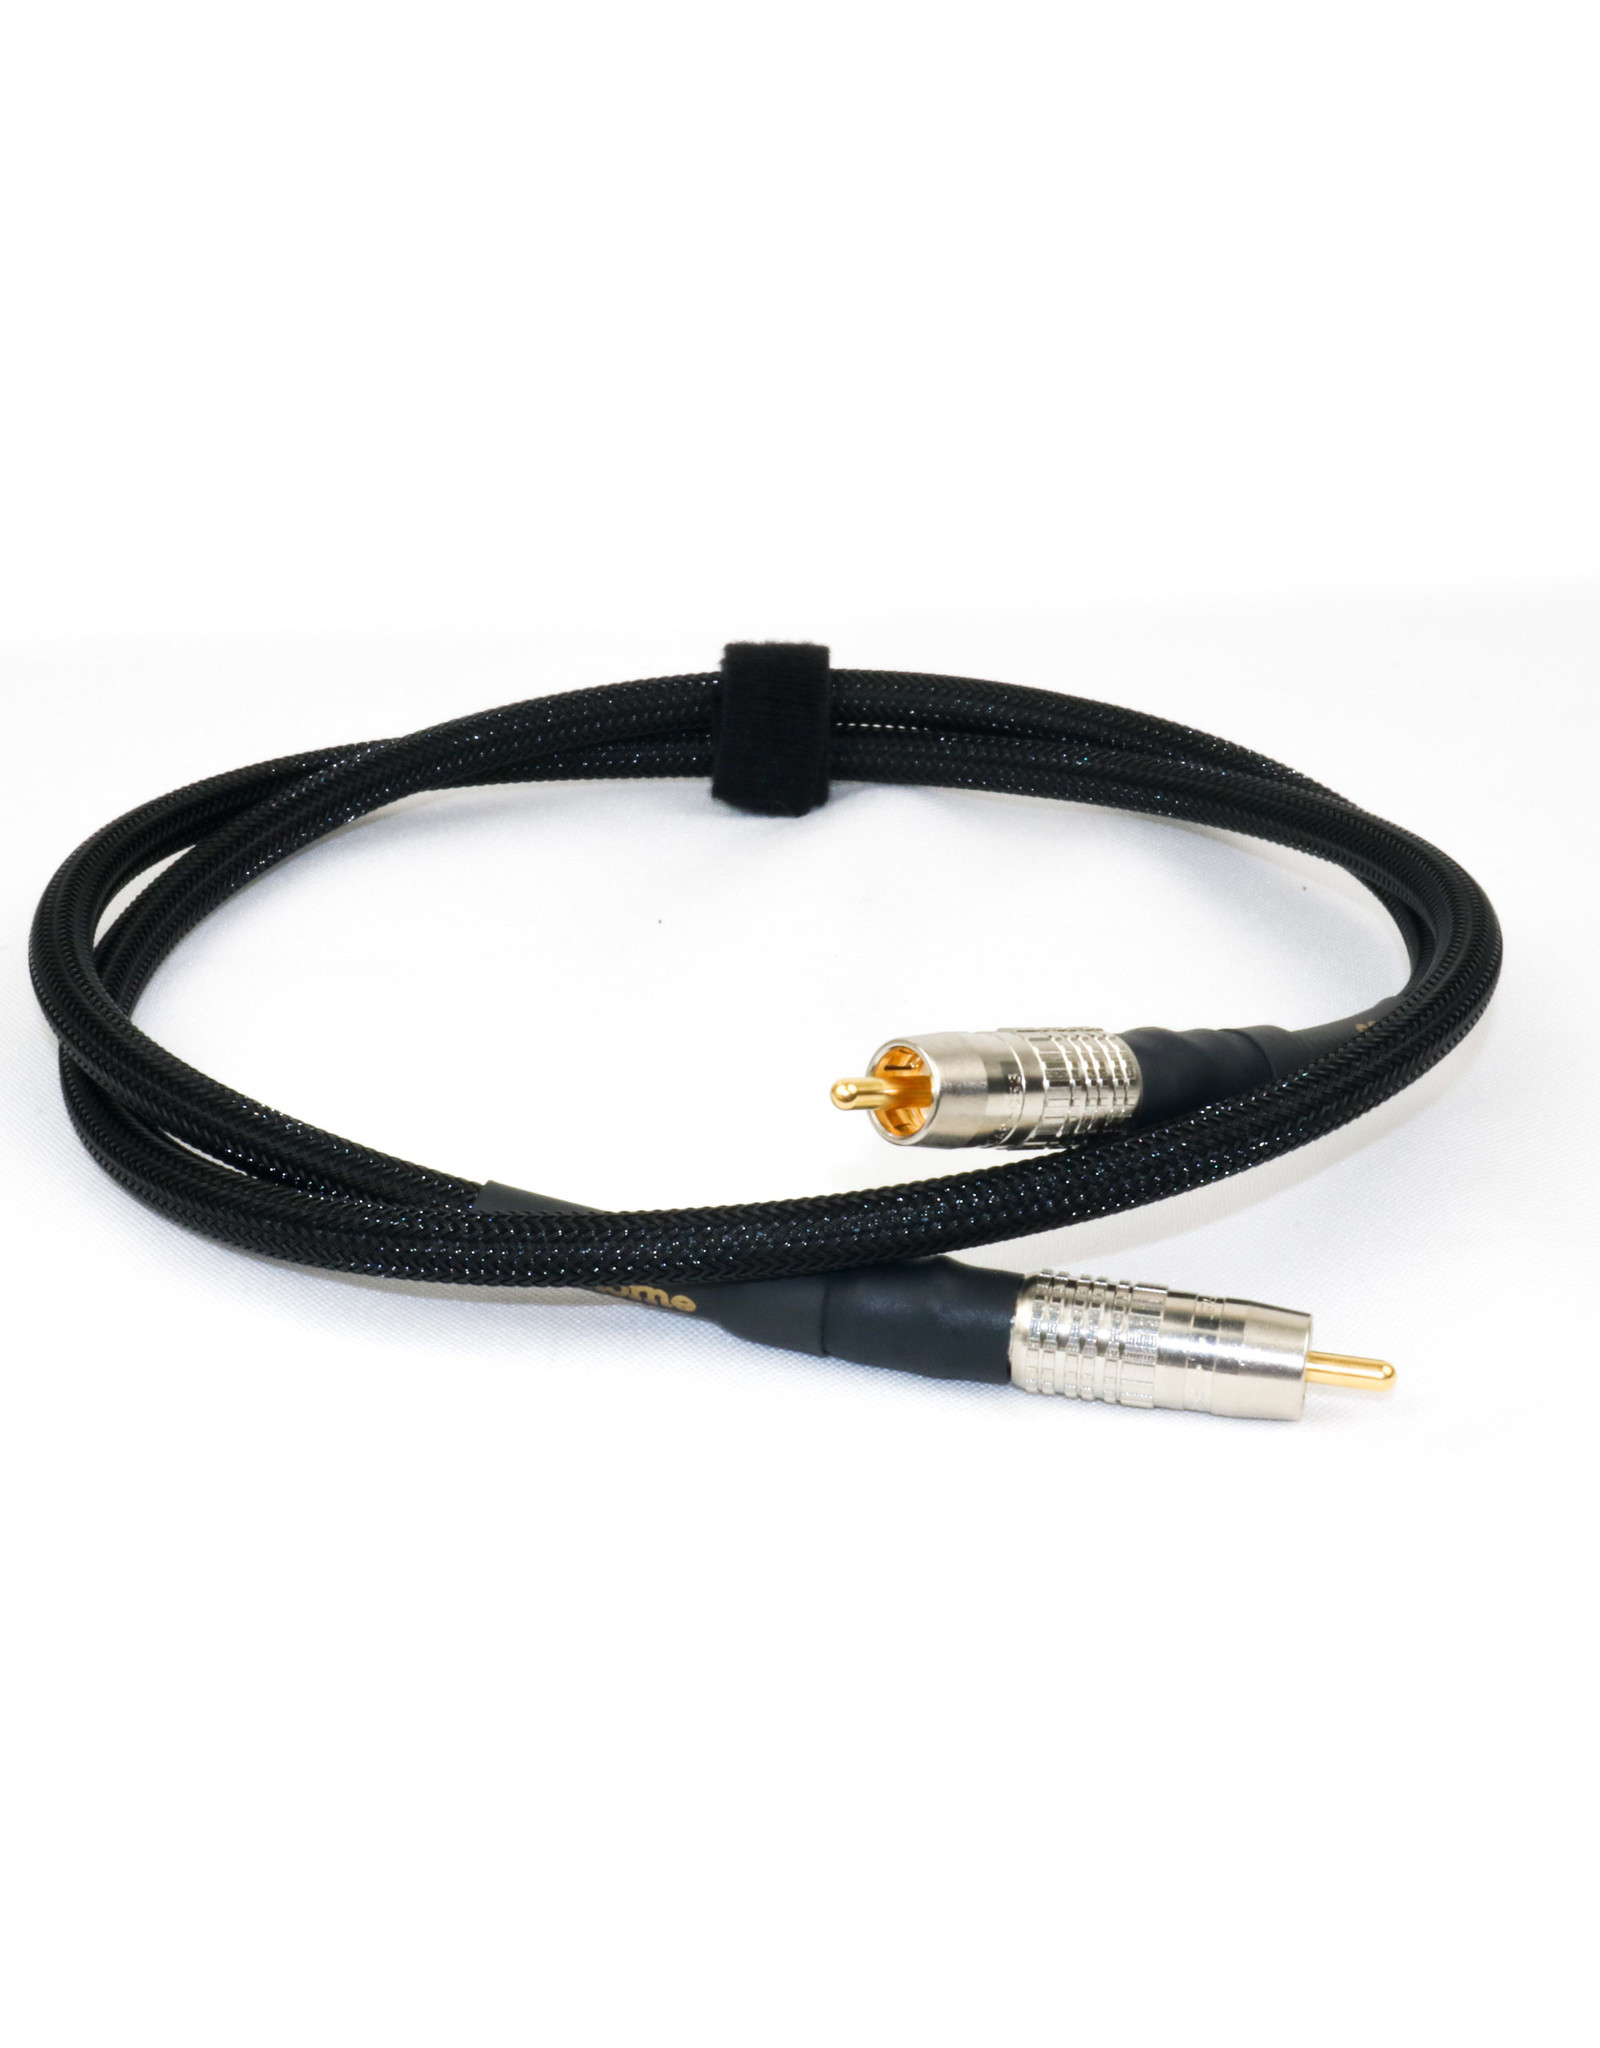 Jeans X Hawthorne Stereo Digital COAX Cables "Better" - Hawthorne Stereo